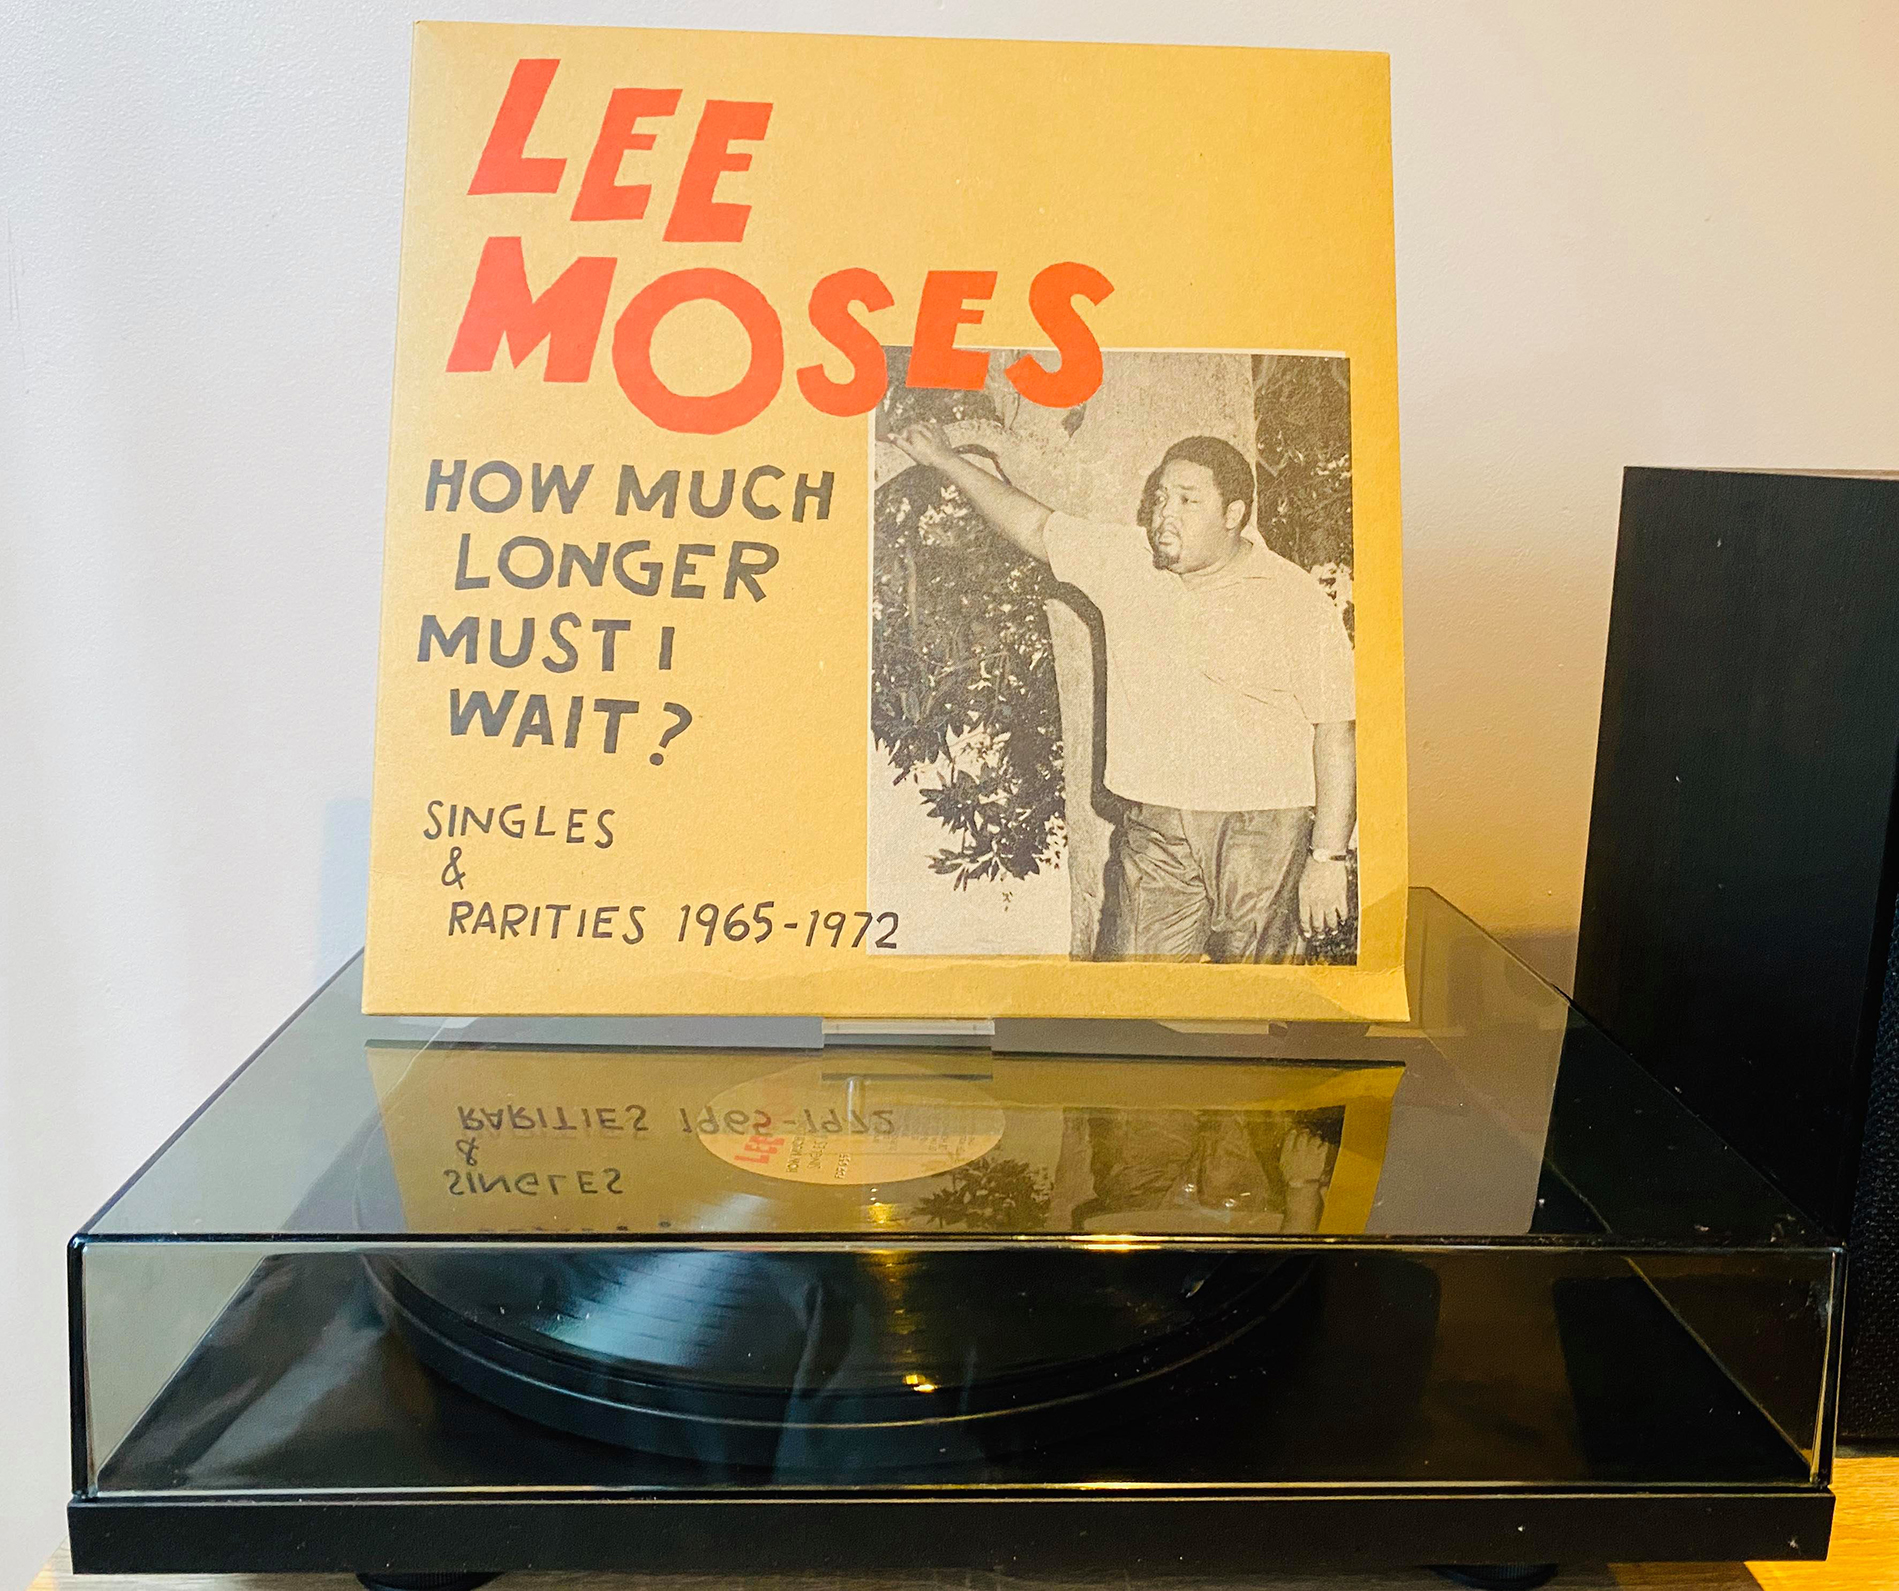 ON THE TURNTABLE: Lee Moses - How Much Longer Must I Wait? : Singles & Rarities 1965 - 1972 